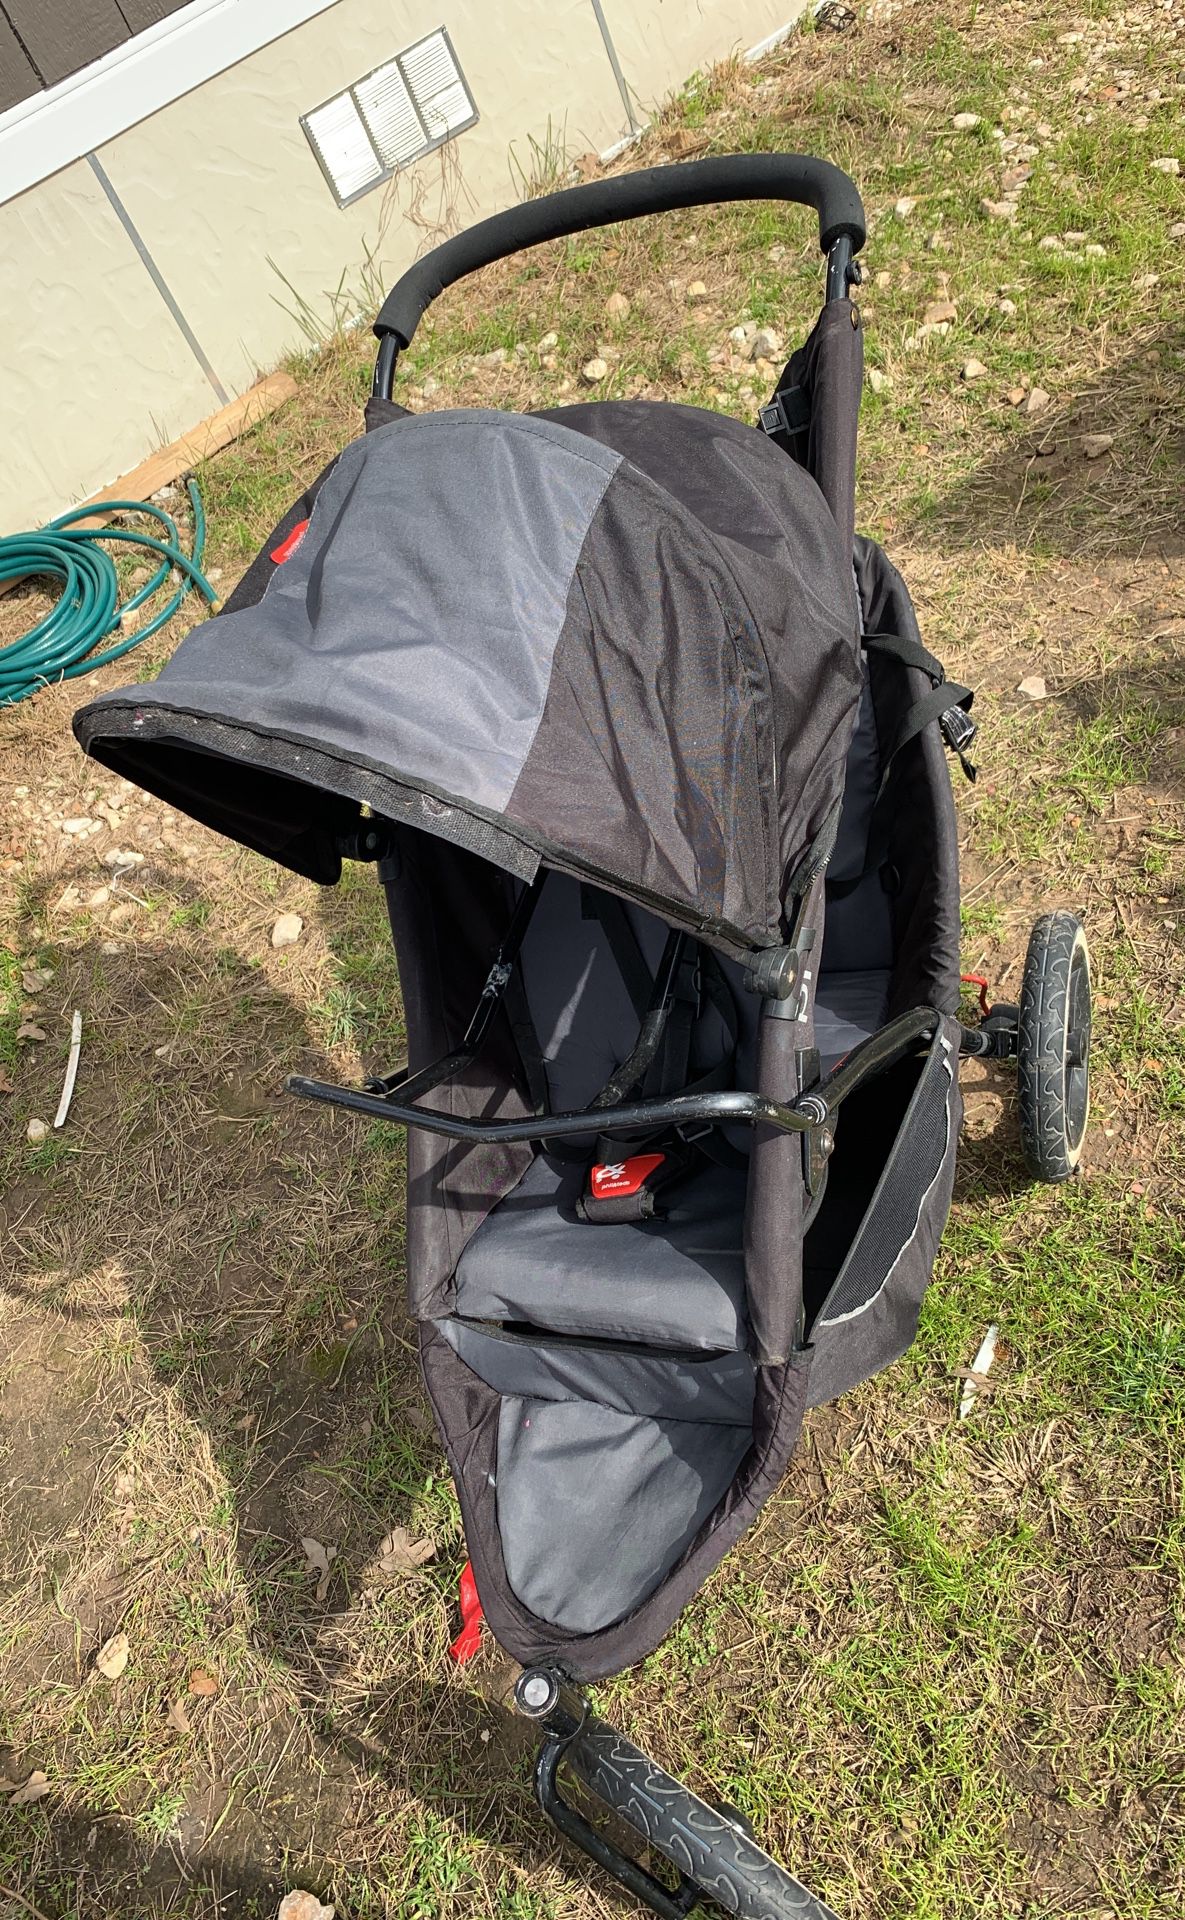 Stroller for two baby’s